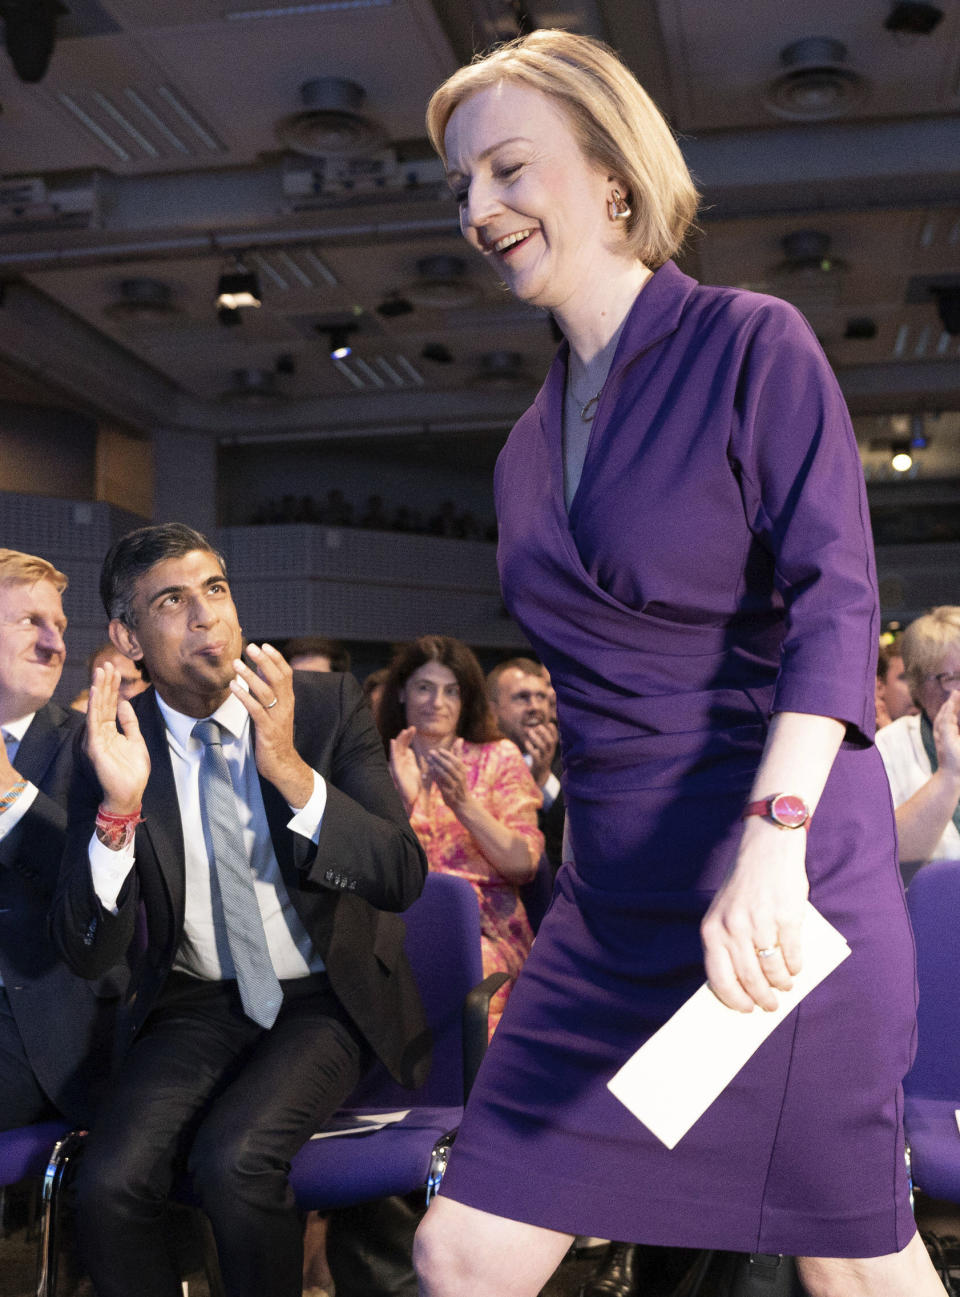 Conservative leadership contender Rishi Sunak, left, applauds as Liz Truss takes to the stage, at the Queen Elizabeth II Centre in London, Monday Sept. 5, 2022. Britain's Conservative Party has chosen Foreign Secretary Liz Truss as the party's new leader, putting her in line to be confirmed as prime minister. Truss's selection was announced Monday in London after a leadership election in which only the 180,000 dues-paying members of the Conservative Party were allowed to vote. (Stefan Rousseau/Pool Photo via AP)